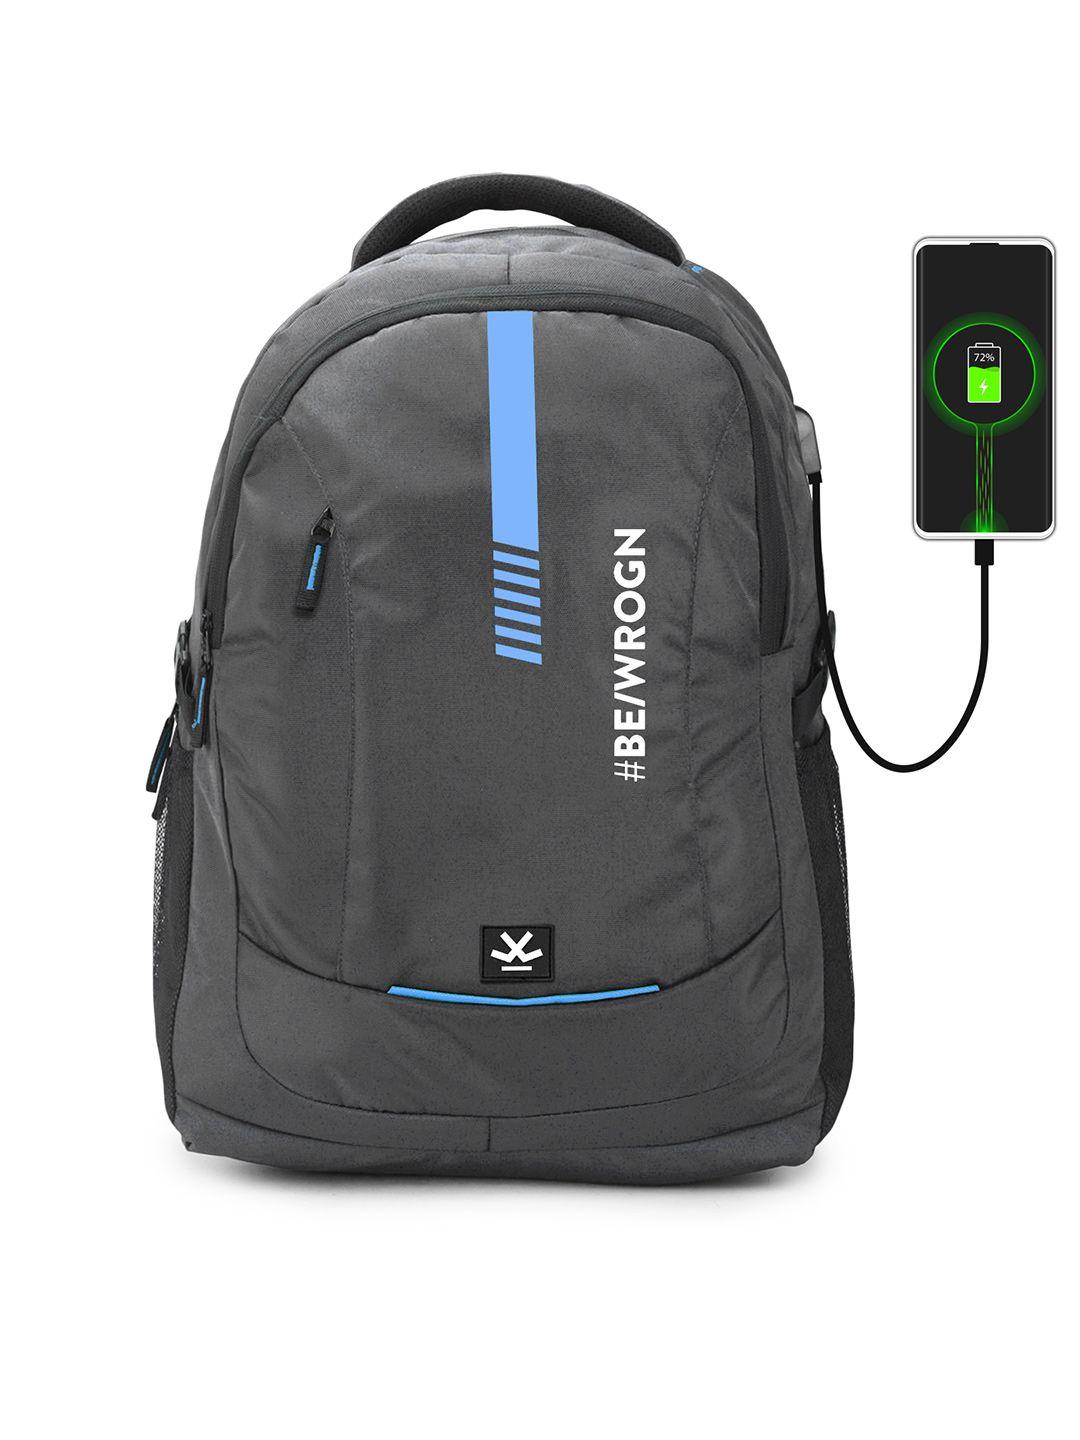 wrogn echo 2.0 ergonomic water resistant backpack with usb charging port & rain cover